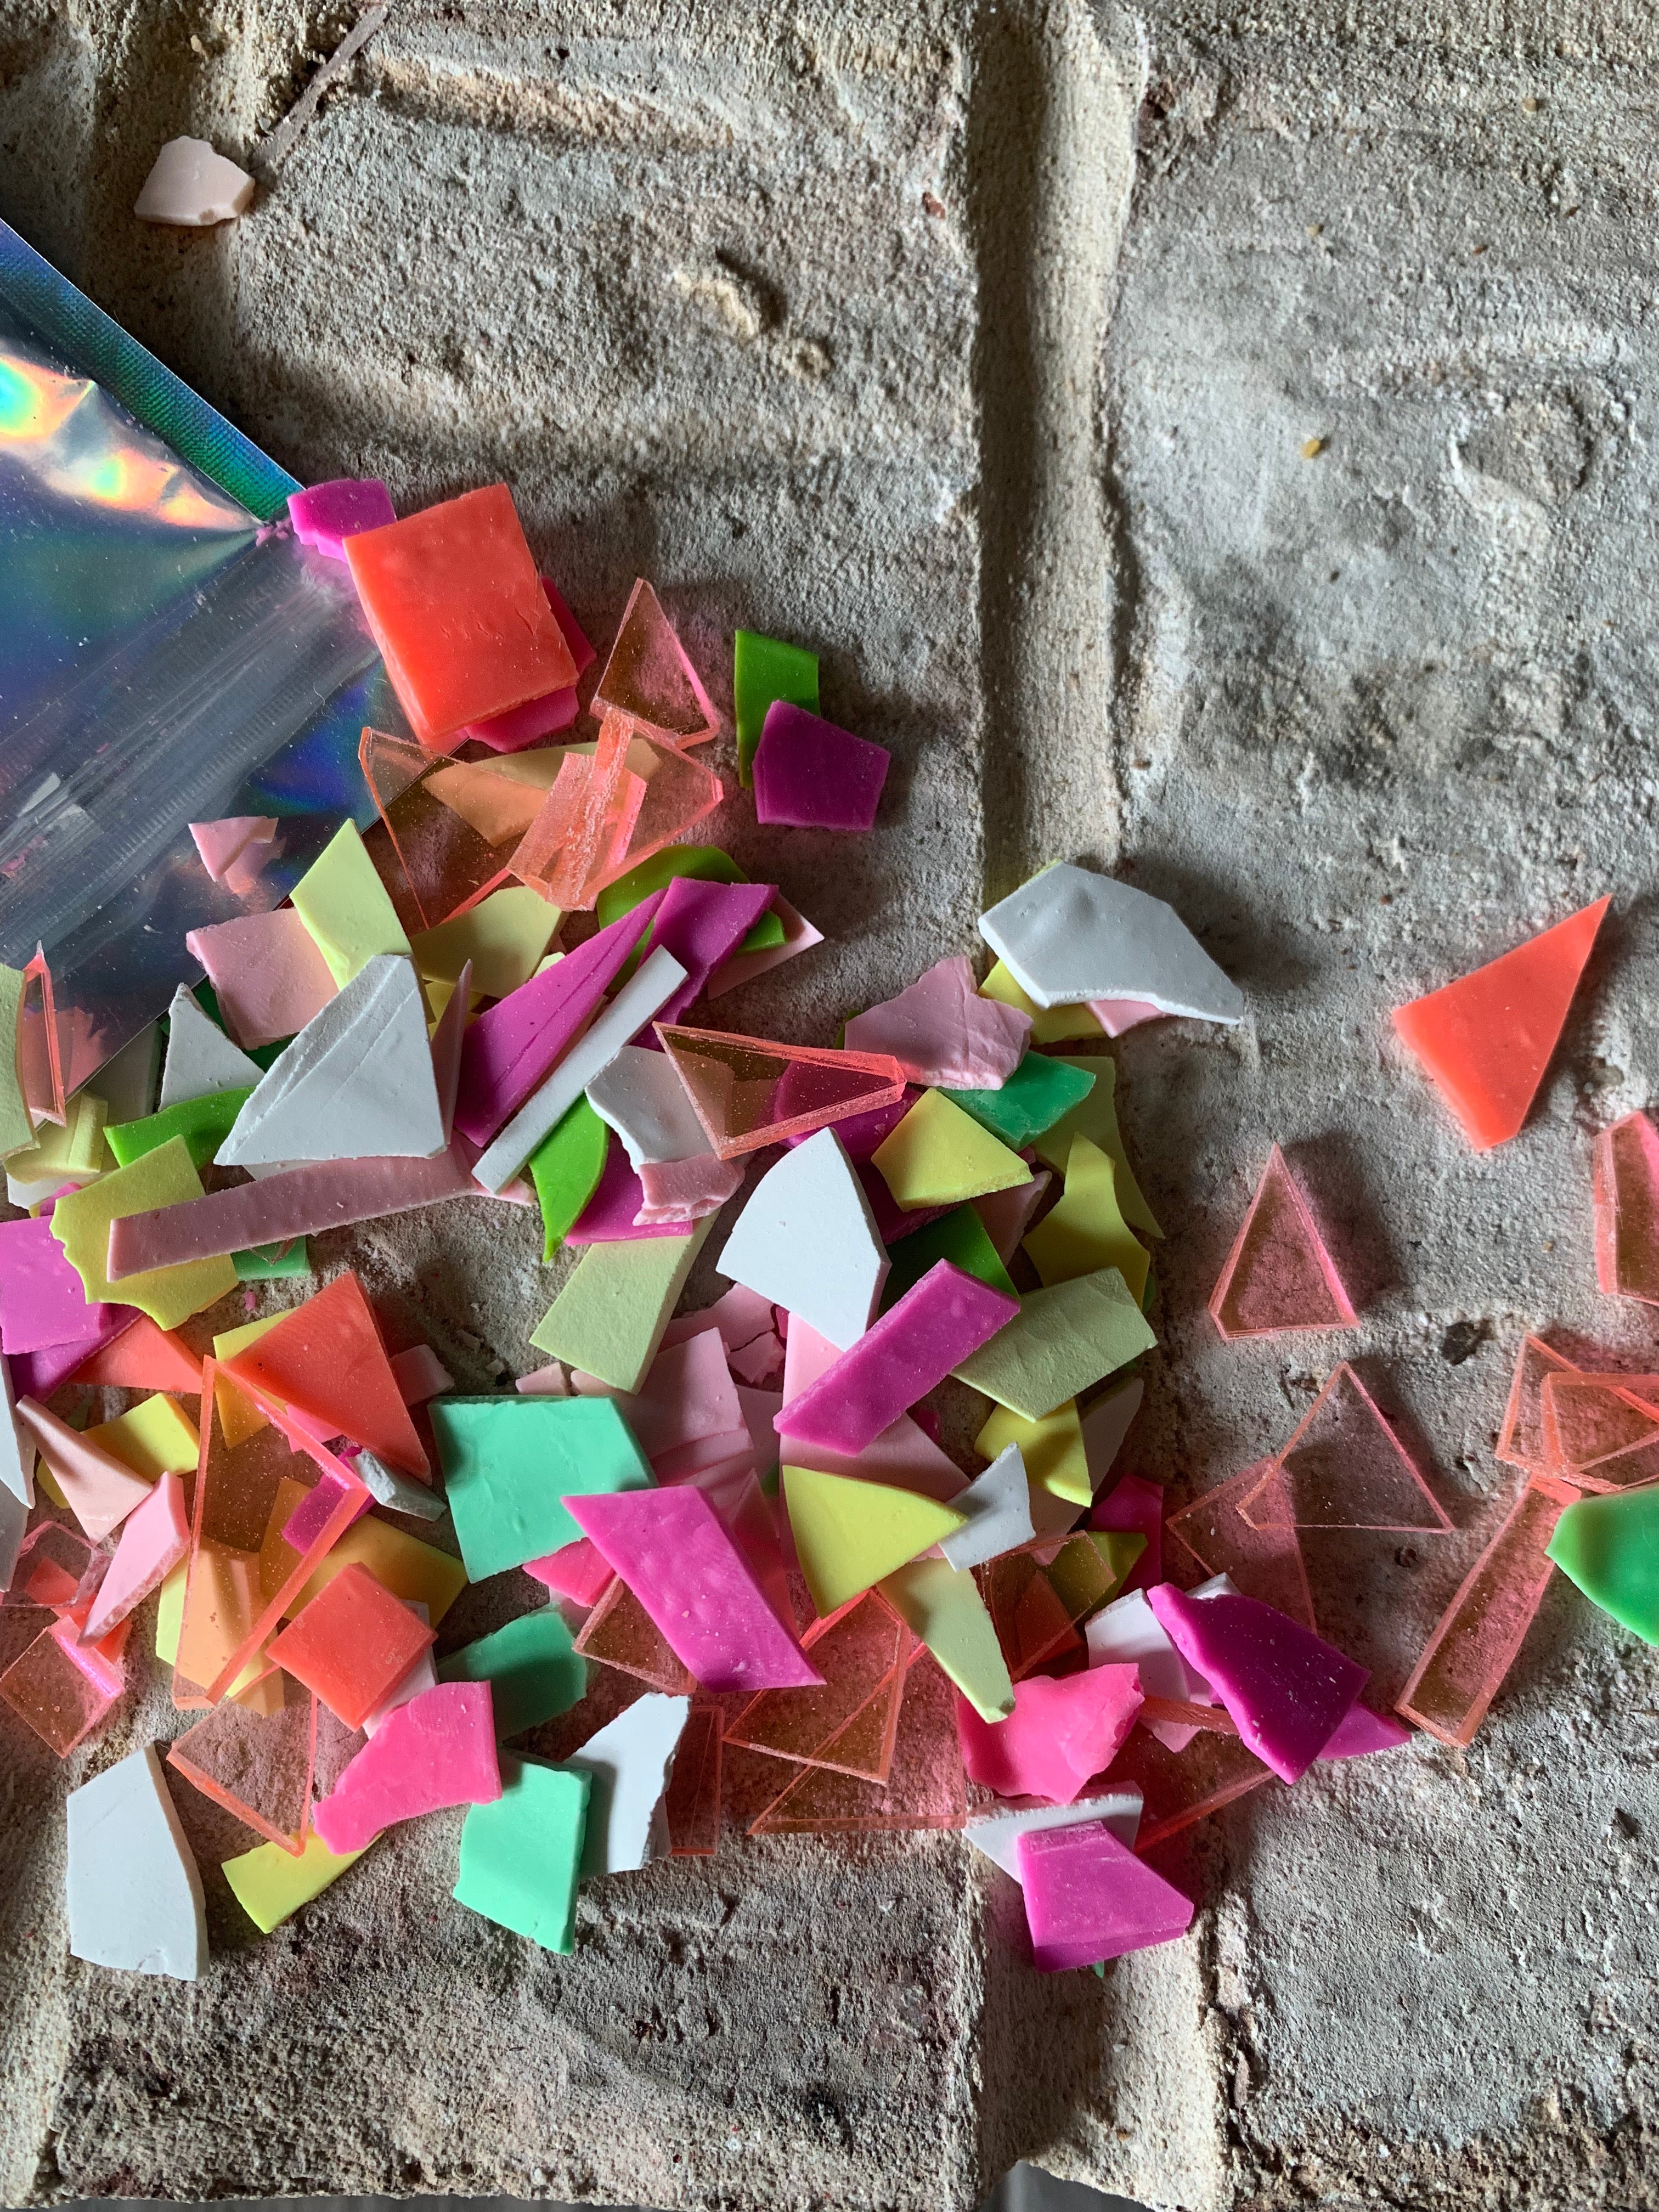 Crystal Low Terrazzo Resin Art Chips - As If